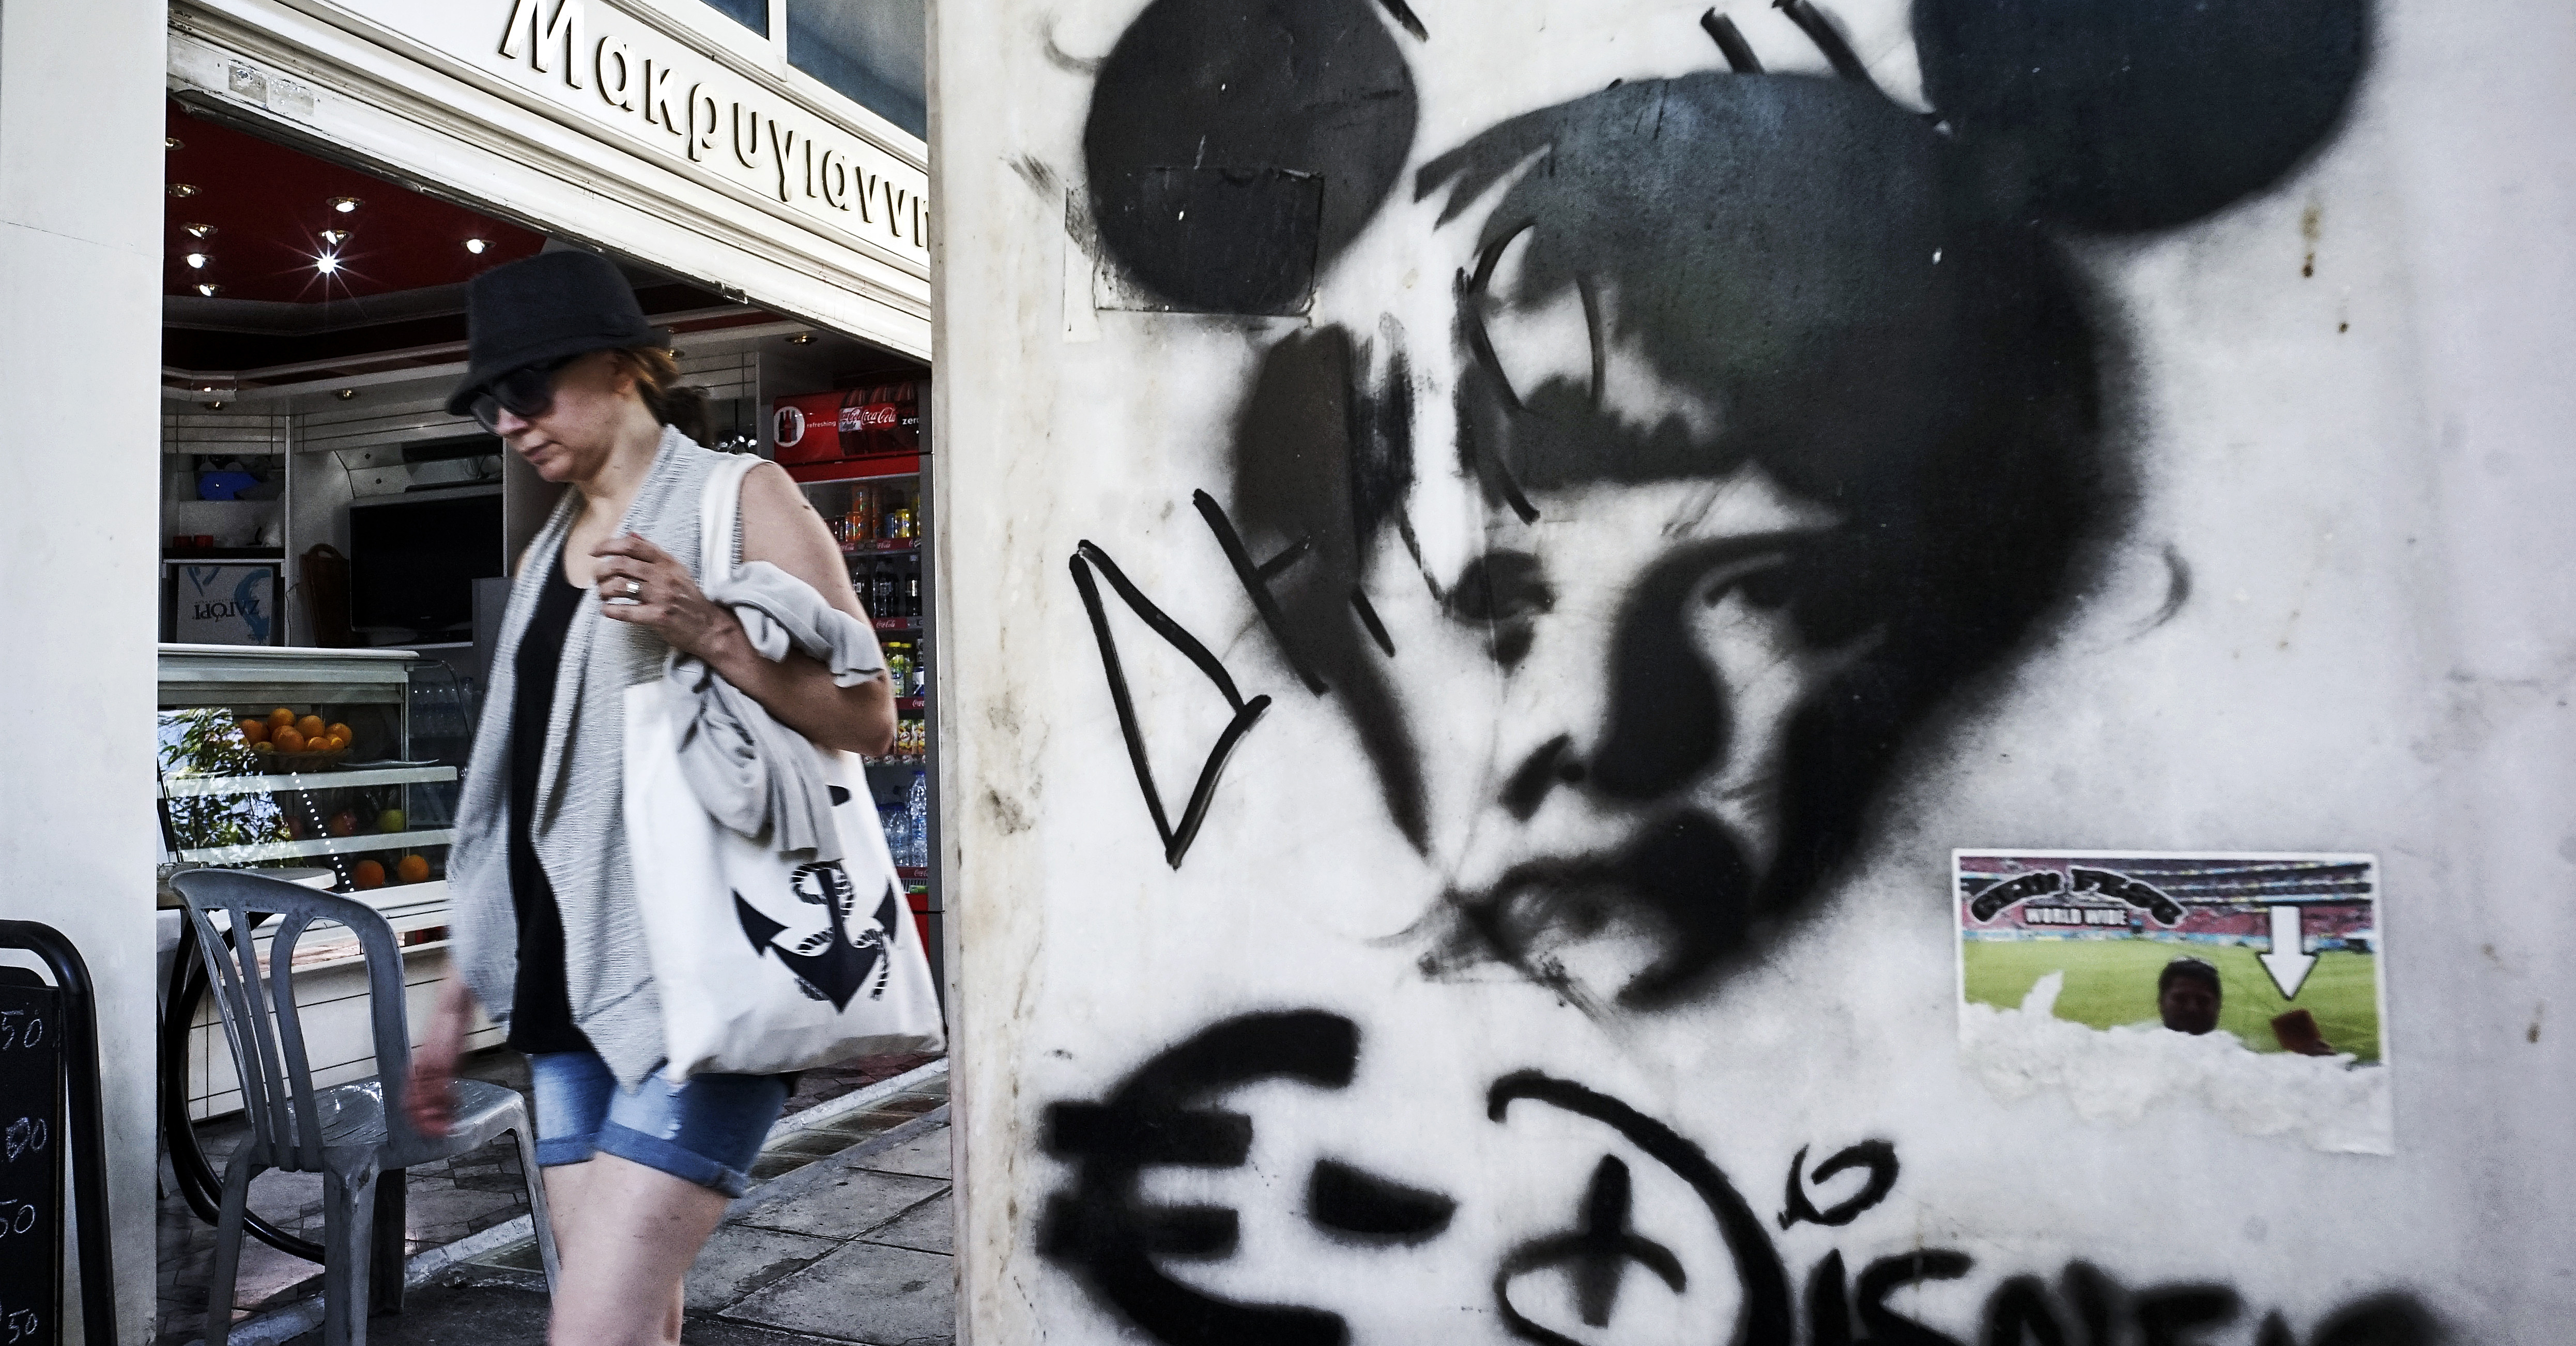 ATHENS, GREECE - JUNE 15: Graffiti showing German Cancellor Angela Merkel as a mouse to compare the European Union with Disney on June 15, 2015 in Athens, Greece. The European Commission has said that Greece and its international creditors need to come to an agreement within the next 2 weeks to avoid a possible default, after weekend talks collapsed. (Photo by Milos Bicanski/Getty Images)